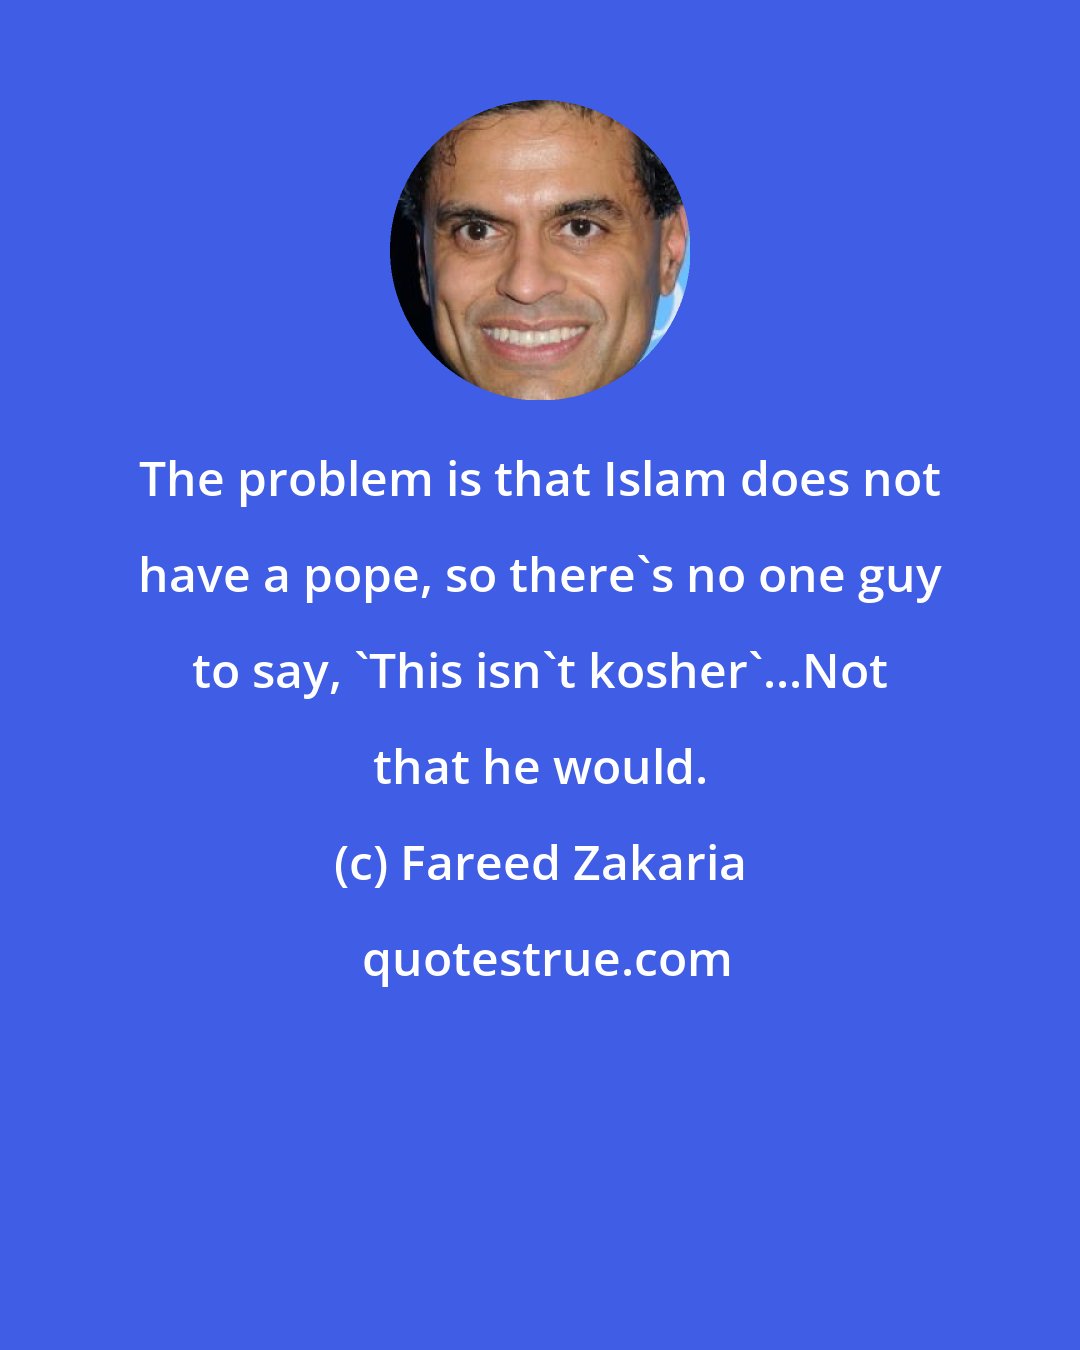 Fareed Zakaria: The problem is that Islam does not have a pope, so there's no one guy to say, 'This isn't kosher'...Not that he would.